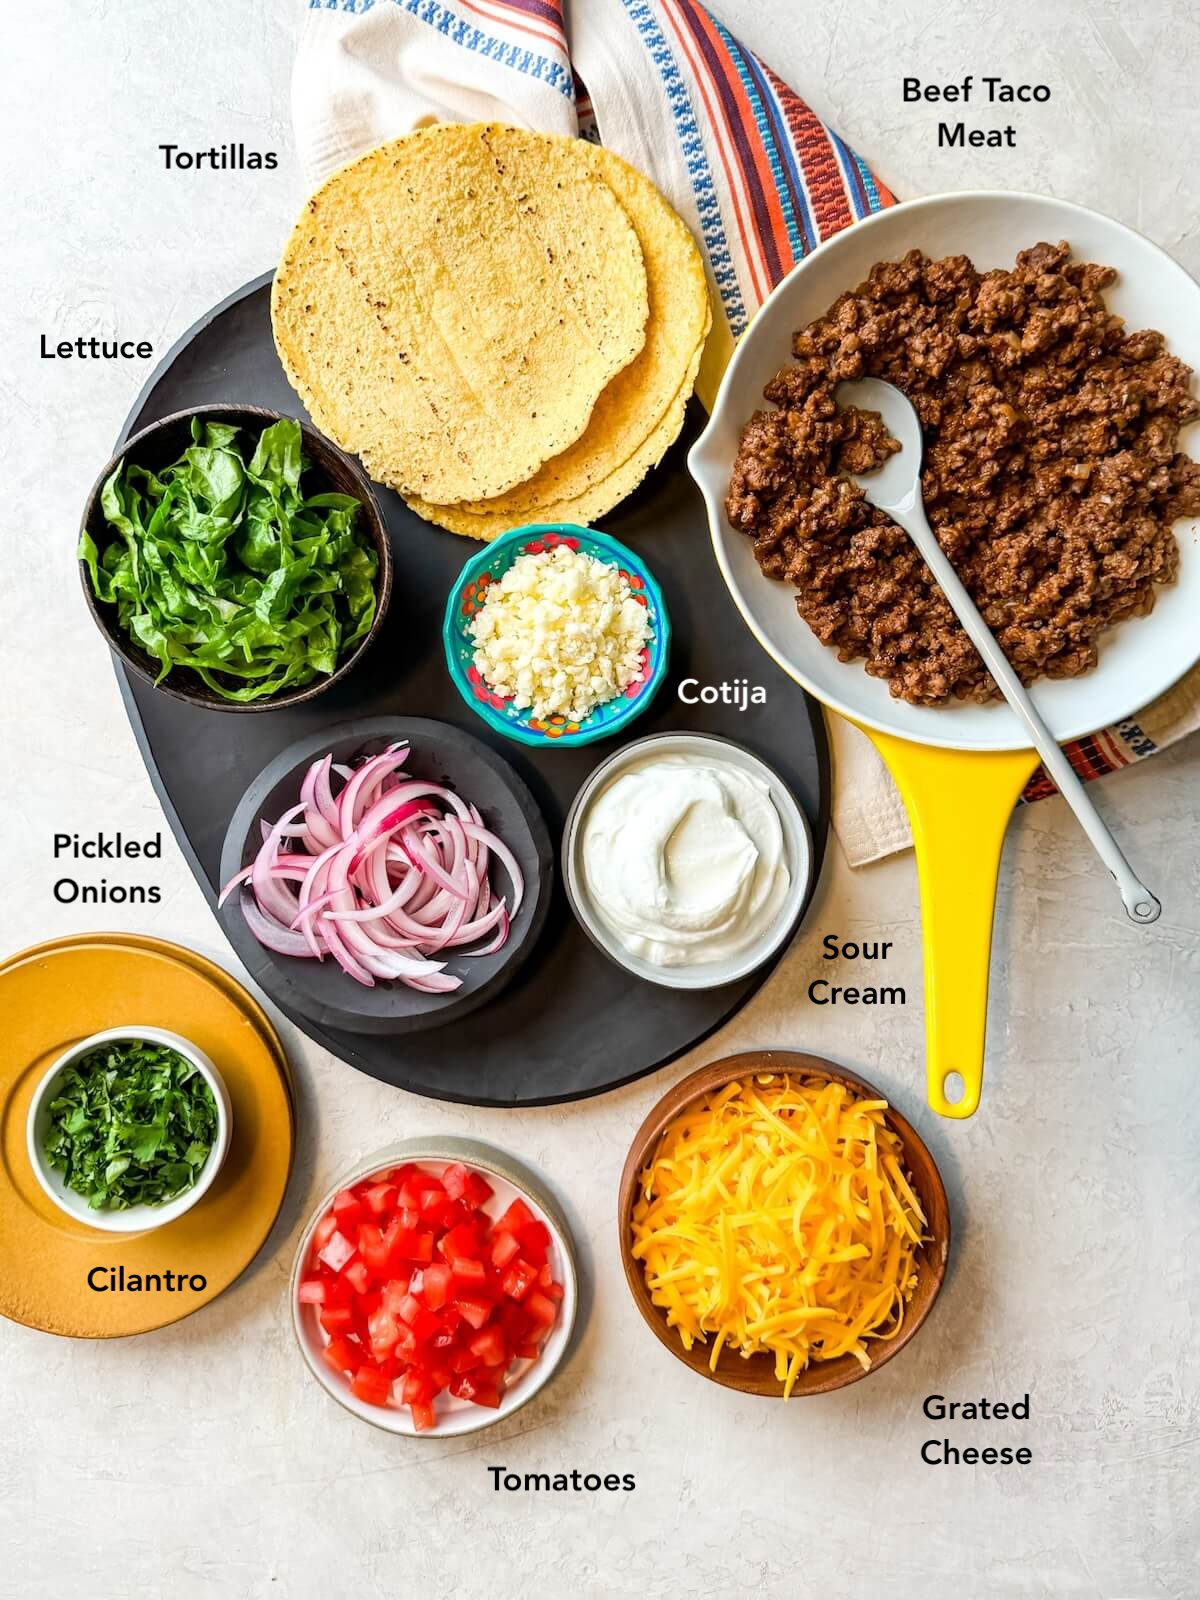 Ground beef tacos ingredients on a platter including taco meat, tortillas, lettuce, red onion, cotija, sour cream, cheese, tomatoes, and cilantro.